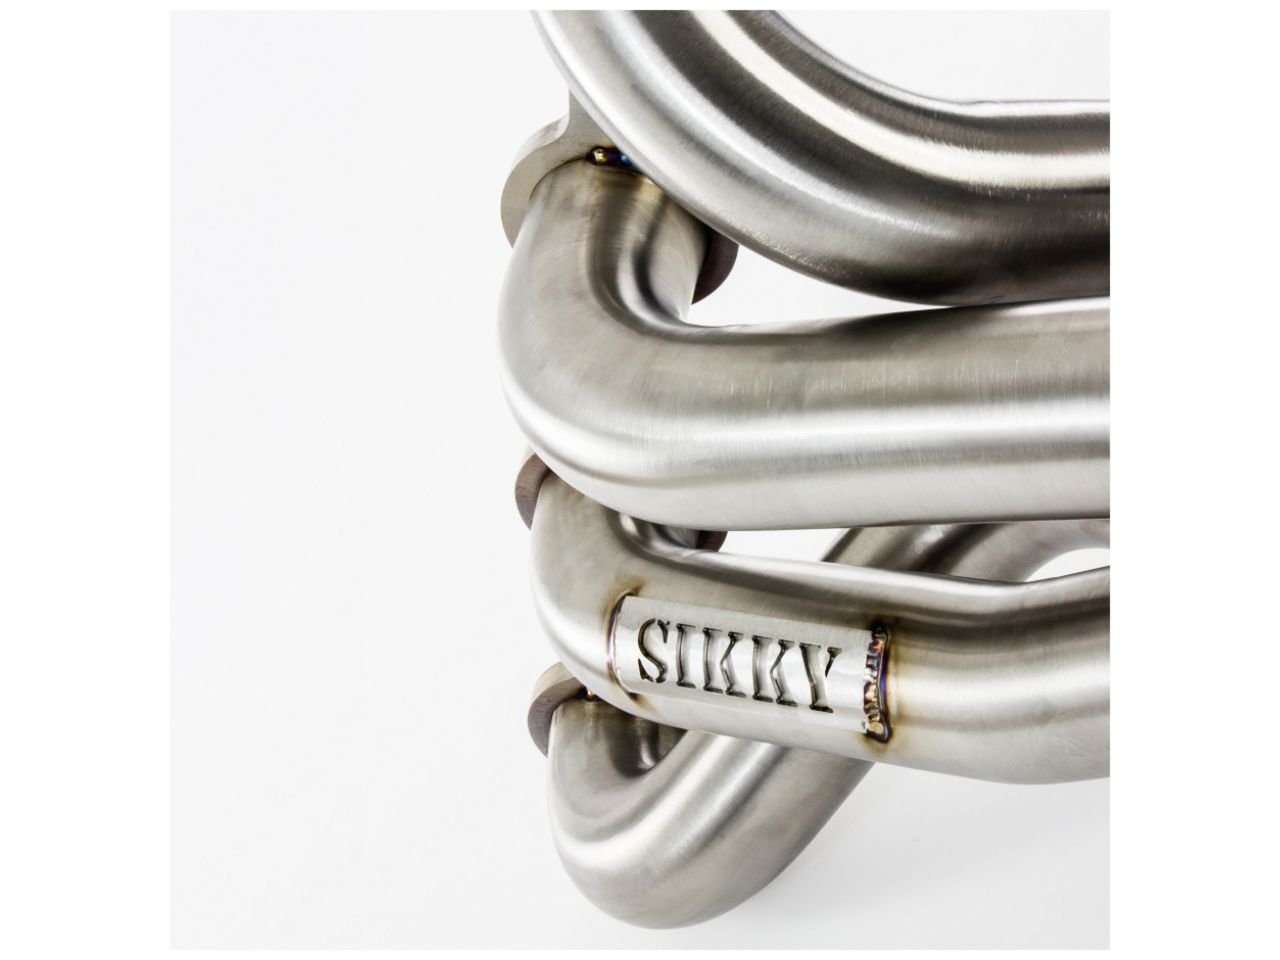 Sikky BMW E30 LS Swap Headers 1 7/8" Stainless Steel